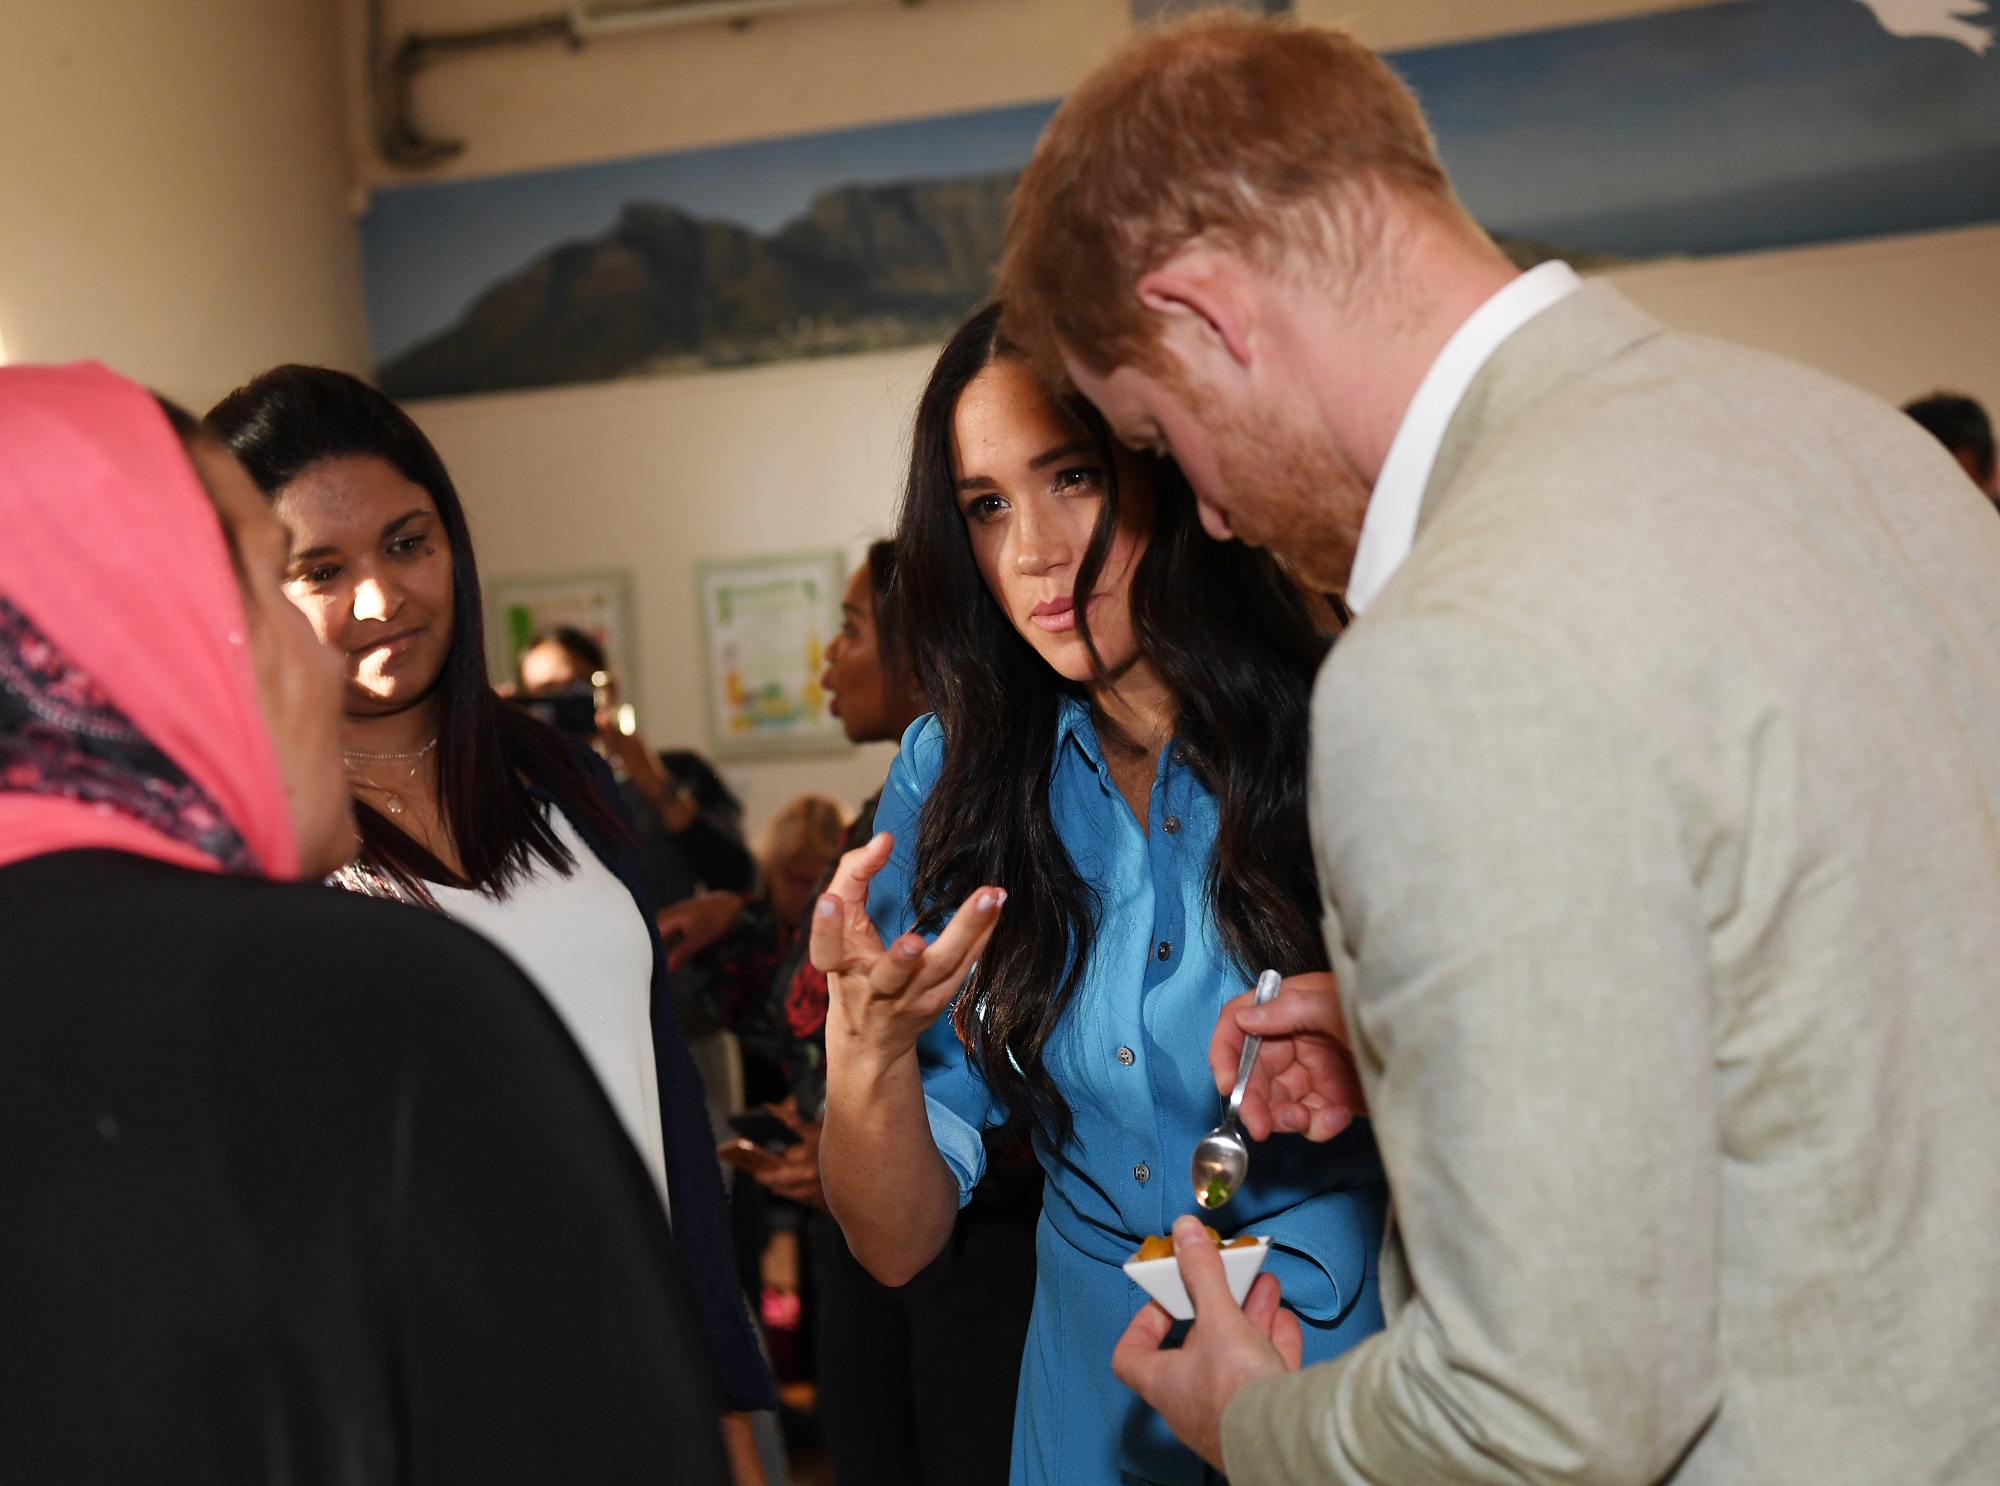 CAPE TOWN, SOUTH AFRICA - SEPTEMBER 23: Meghan, Duchess of Sussex and Prince Harry, Duke of Sussex visit the District 6 Homecoming centre on September 23, 2019 in Cape Town, South Africa. District 6 is a former inner-city residential area in Cape Town, where freed slaves, artisans, immigrants, merchants and the Cape Malay community lived. For over a hundred years, different communities and races lived side by side, and the District became known for its vibrant culture, music and food. In 1966, the government declared District 6 a whites-only area, and over 60,000 residents were forcibly removed and relocated to the Cape Flats Township. (Photo by Facundo Arrizabalaga - Pool/Getty Images)